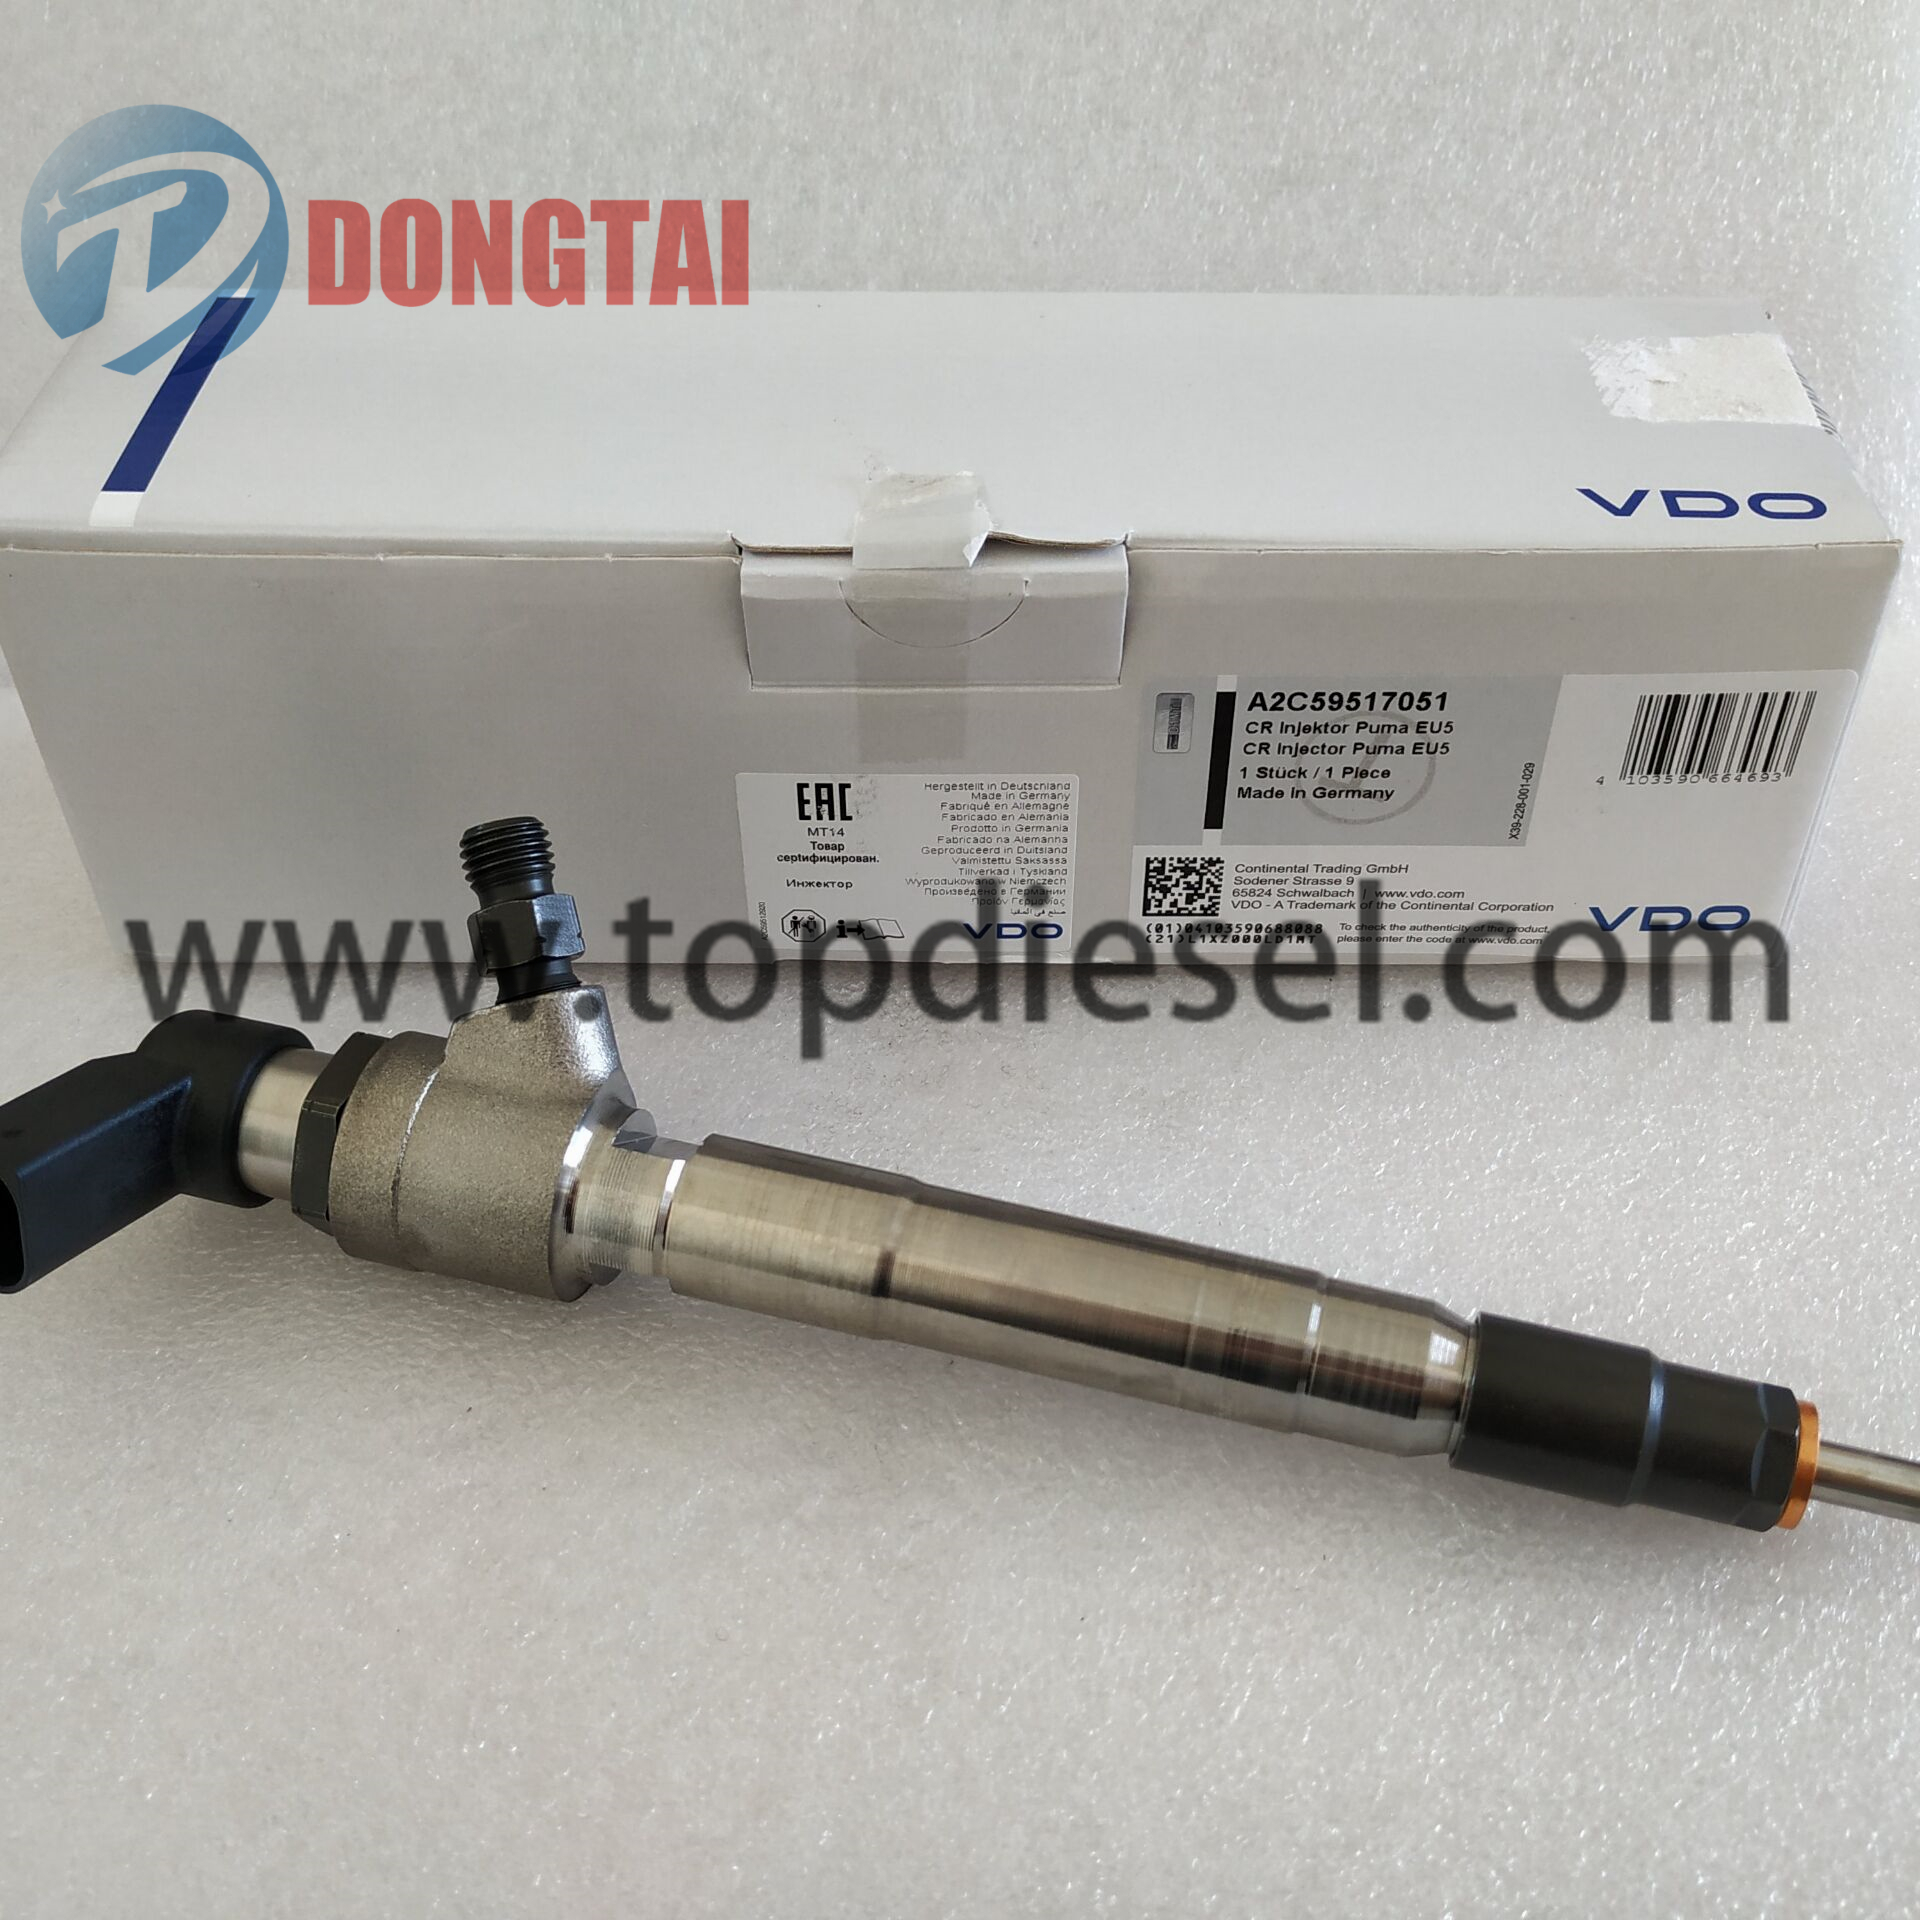 Fixed Competitive Price Common Rail Injector Valve Measuring Tool - Siemens-VDO Common Rail Injector A2C59517051  BK2Q-9K546-AG for Citroen, Ford, Land Rover, Peugeot – Dongtai